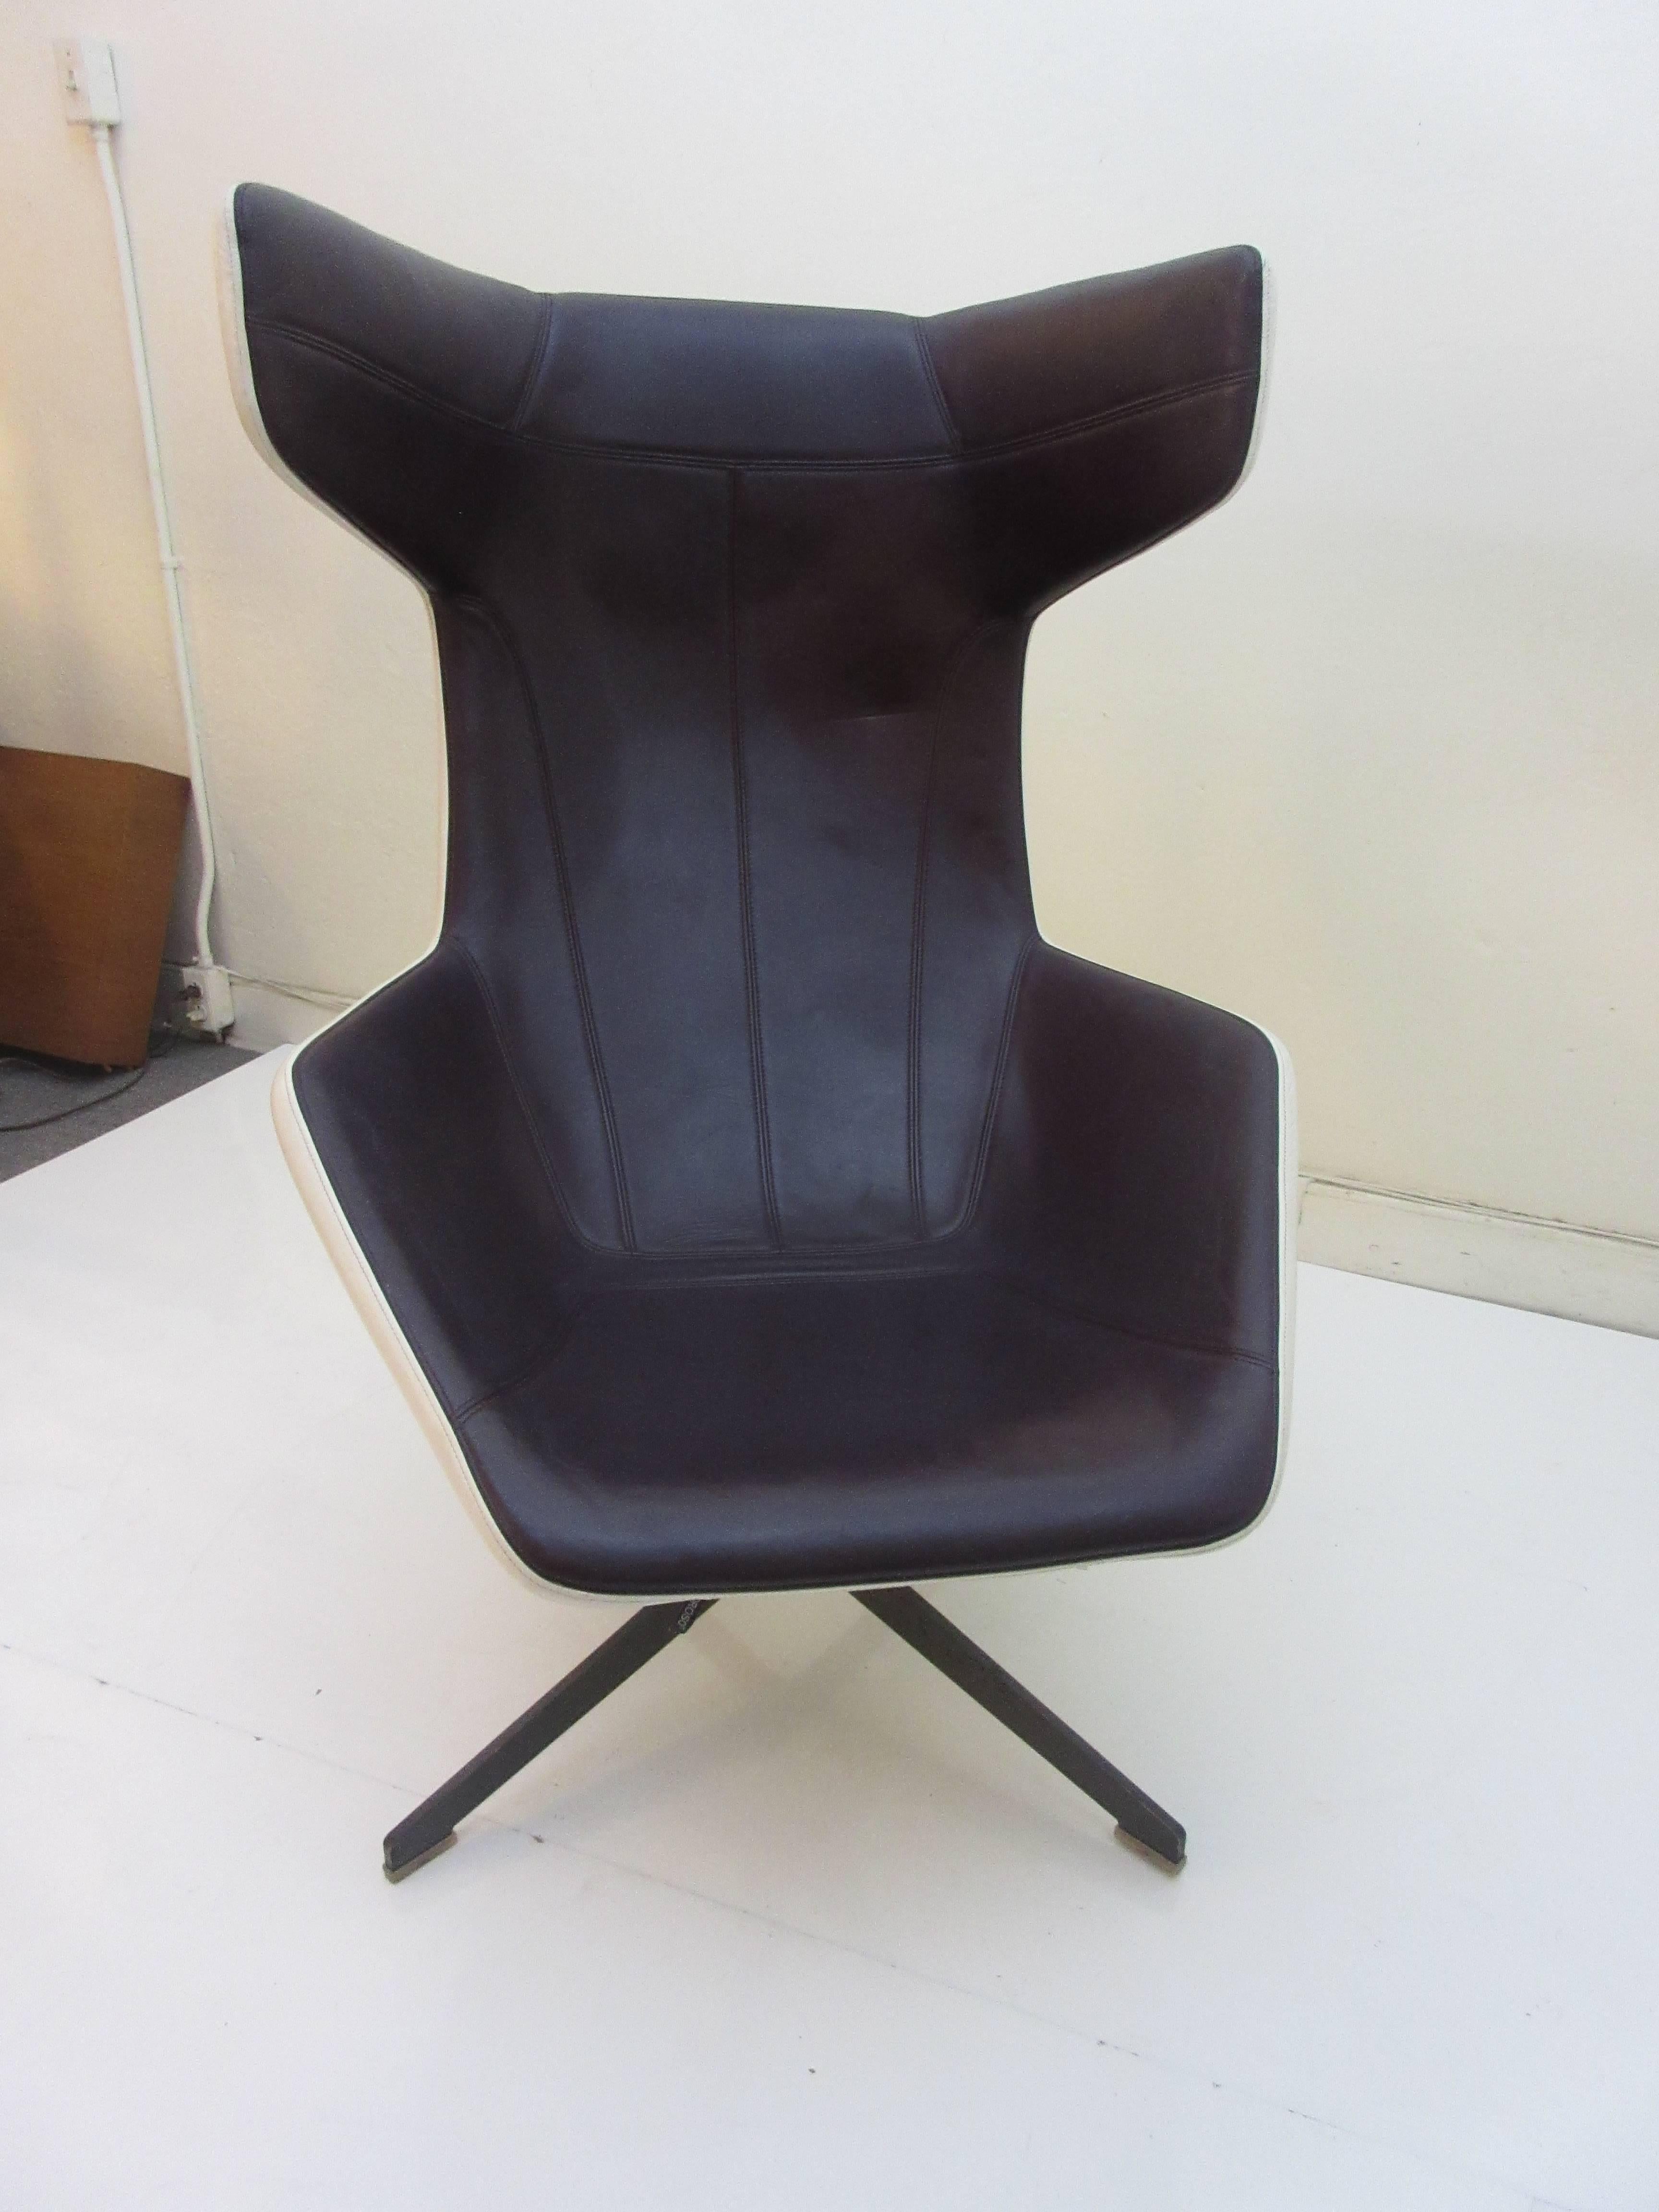 Moroso by Alfredo Haberli take a line for a walk chair after a Klee Paining. This exaggerated deep plum with white exterior leather swivel chair envelops the sitter. The base is solid steel and the fabric label is intact. Designed in 2002 and first